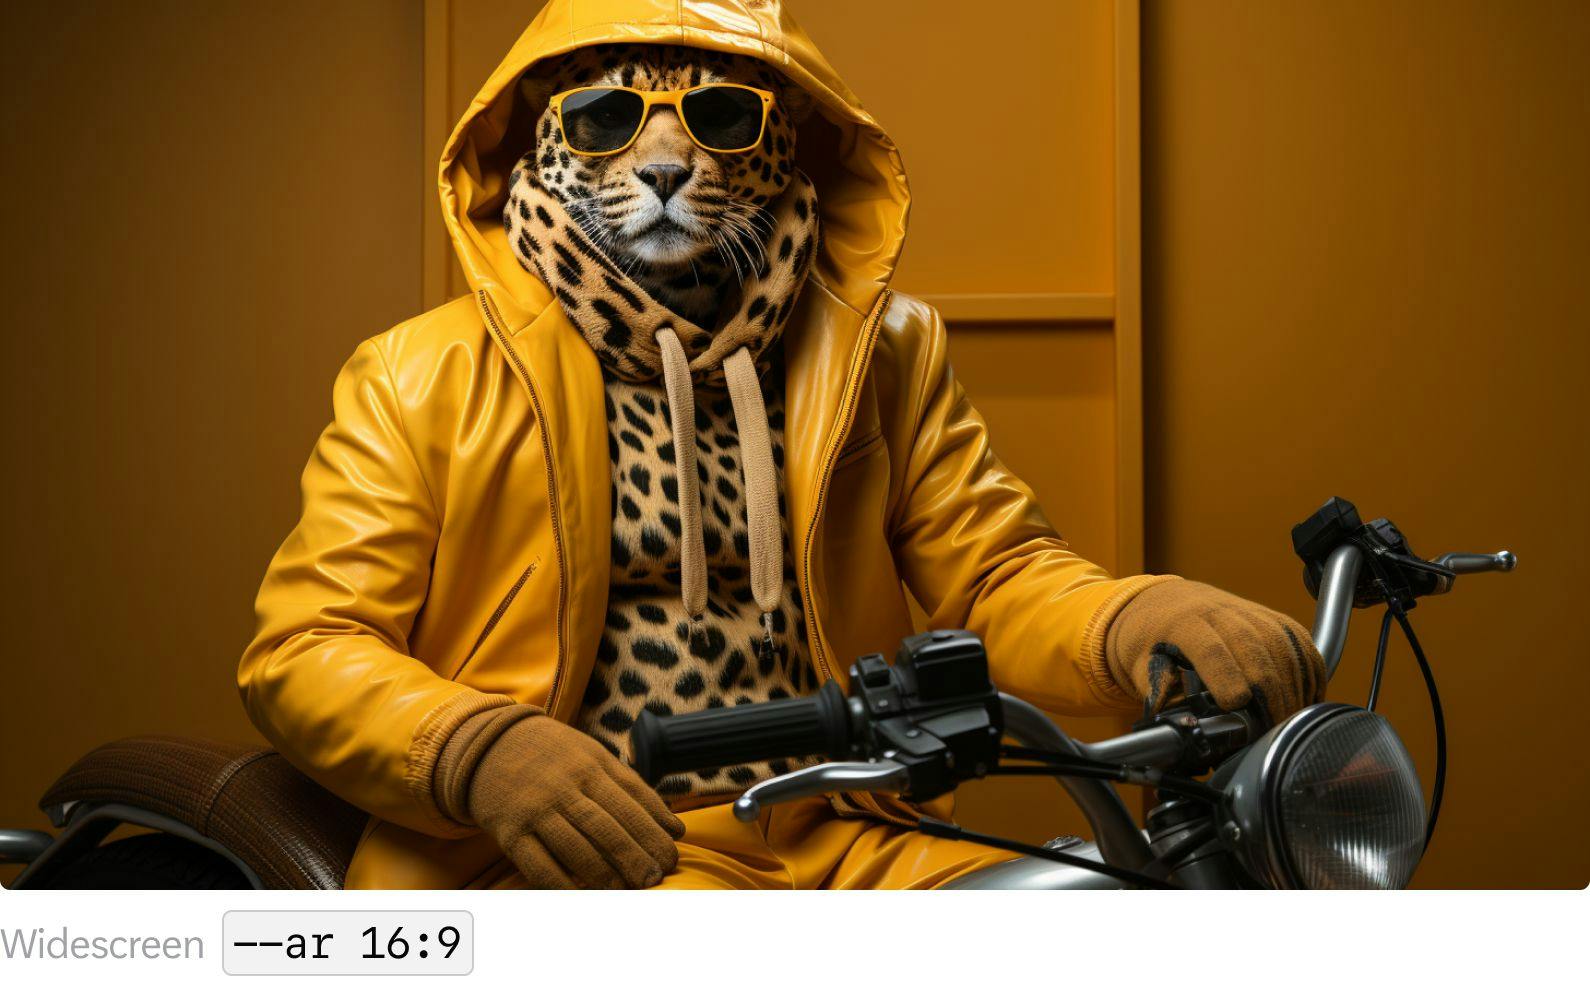 Cheetah with sunglasses and fashionable clothes on a racing bike